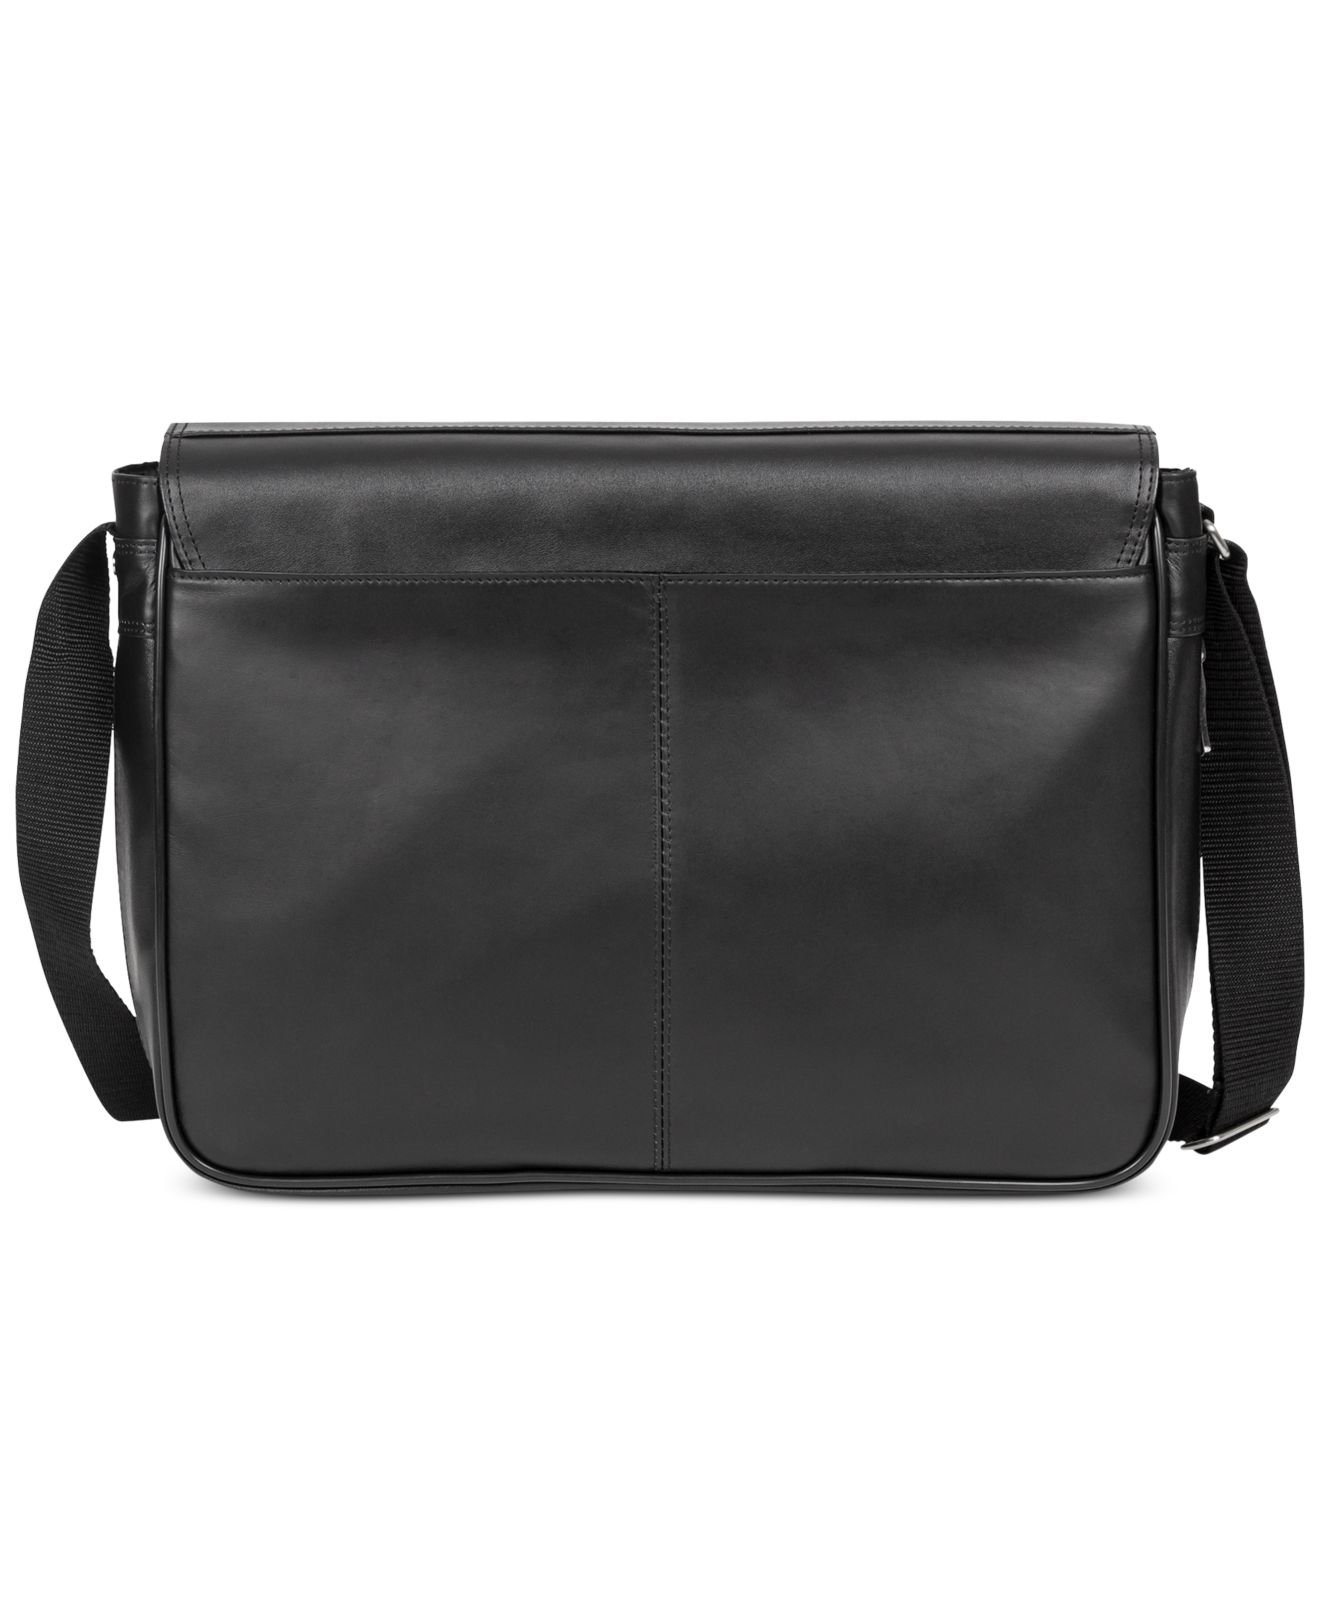 Lyst - Kenneth cole reaction Manhattan Leather What A Bag Expandable ...